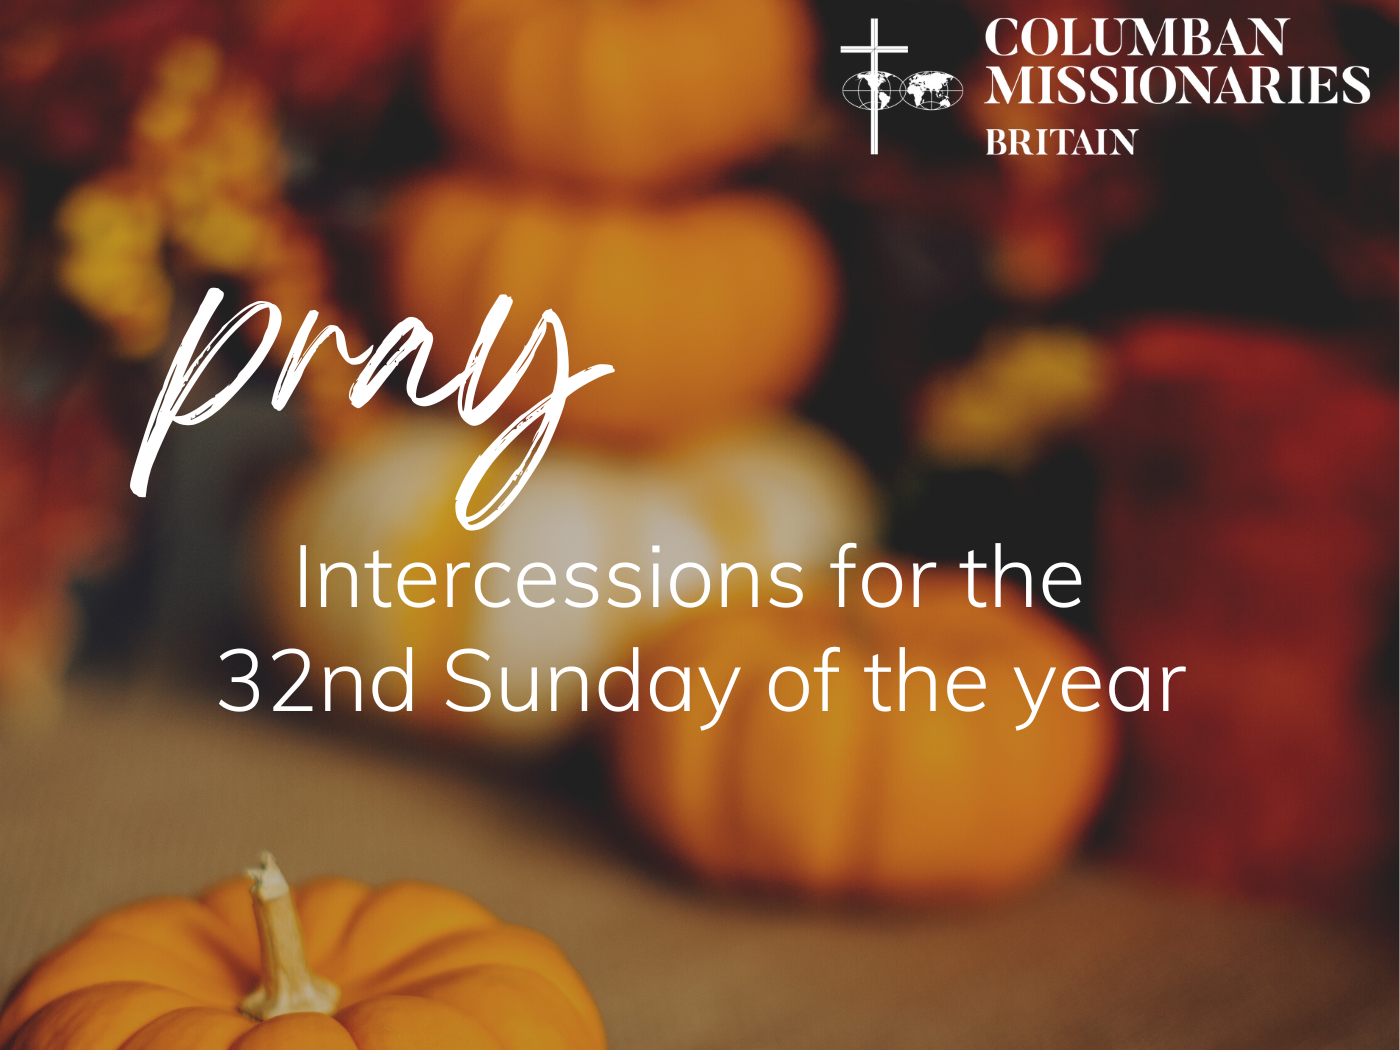 Download prayers of intercession for the 32nd Sunday of the Year